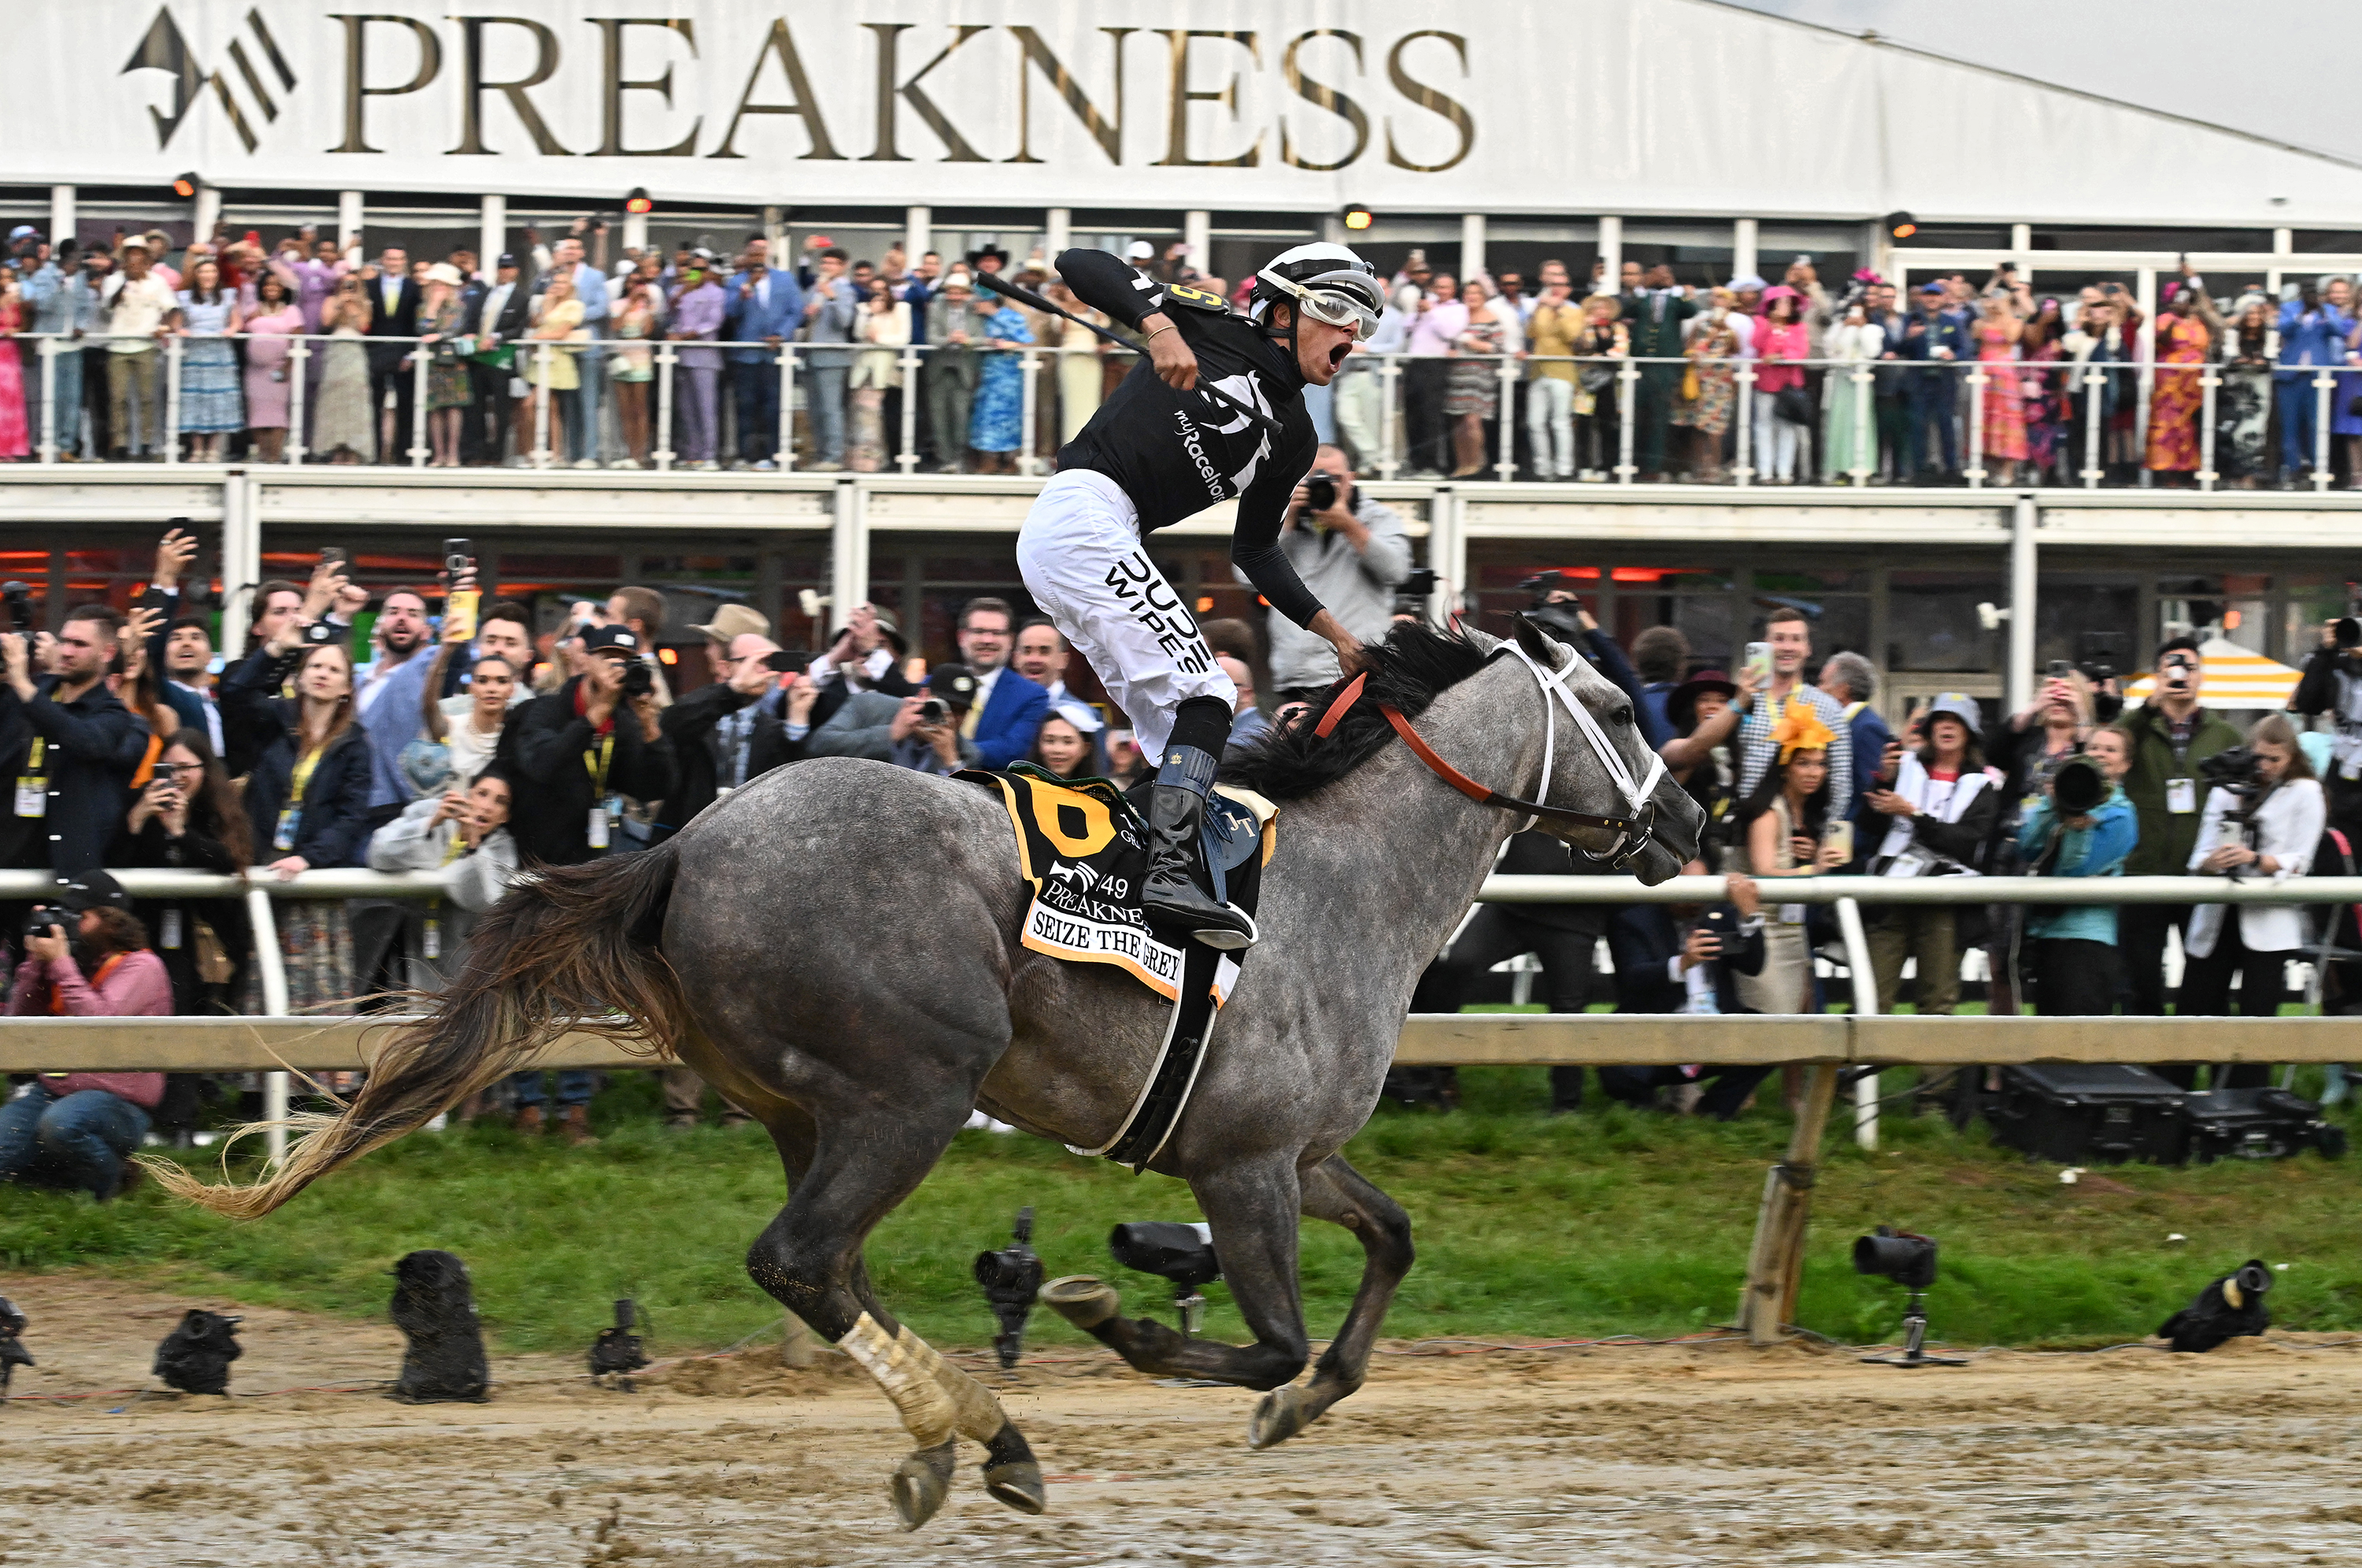 Jaime Torres celebrates winning the 149th running of the Preakness Stakes at Pimlico Race Course aboard Seize the Grey. (Kim Hairston/Staff)